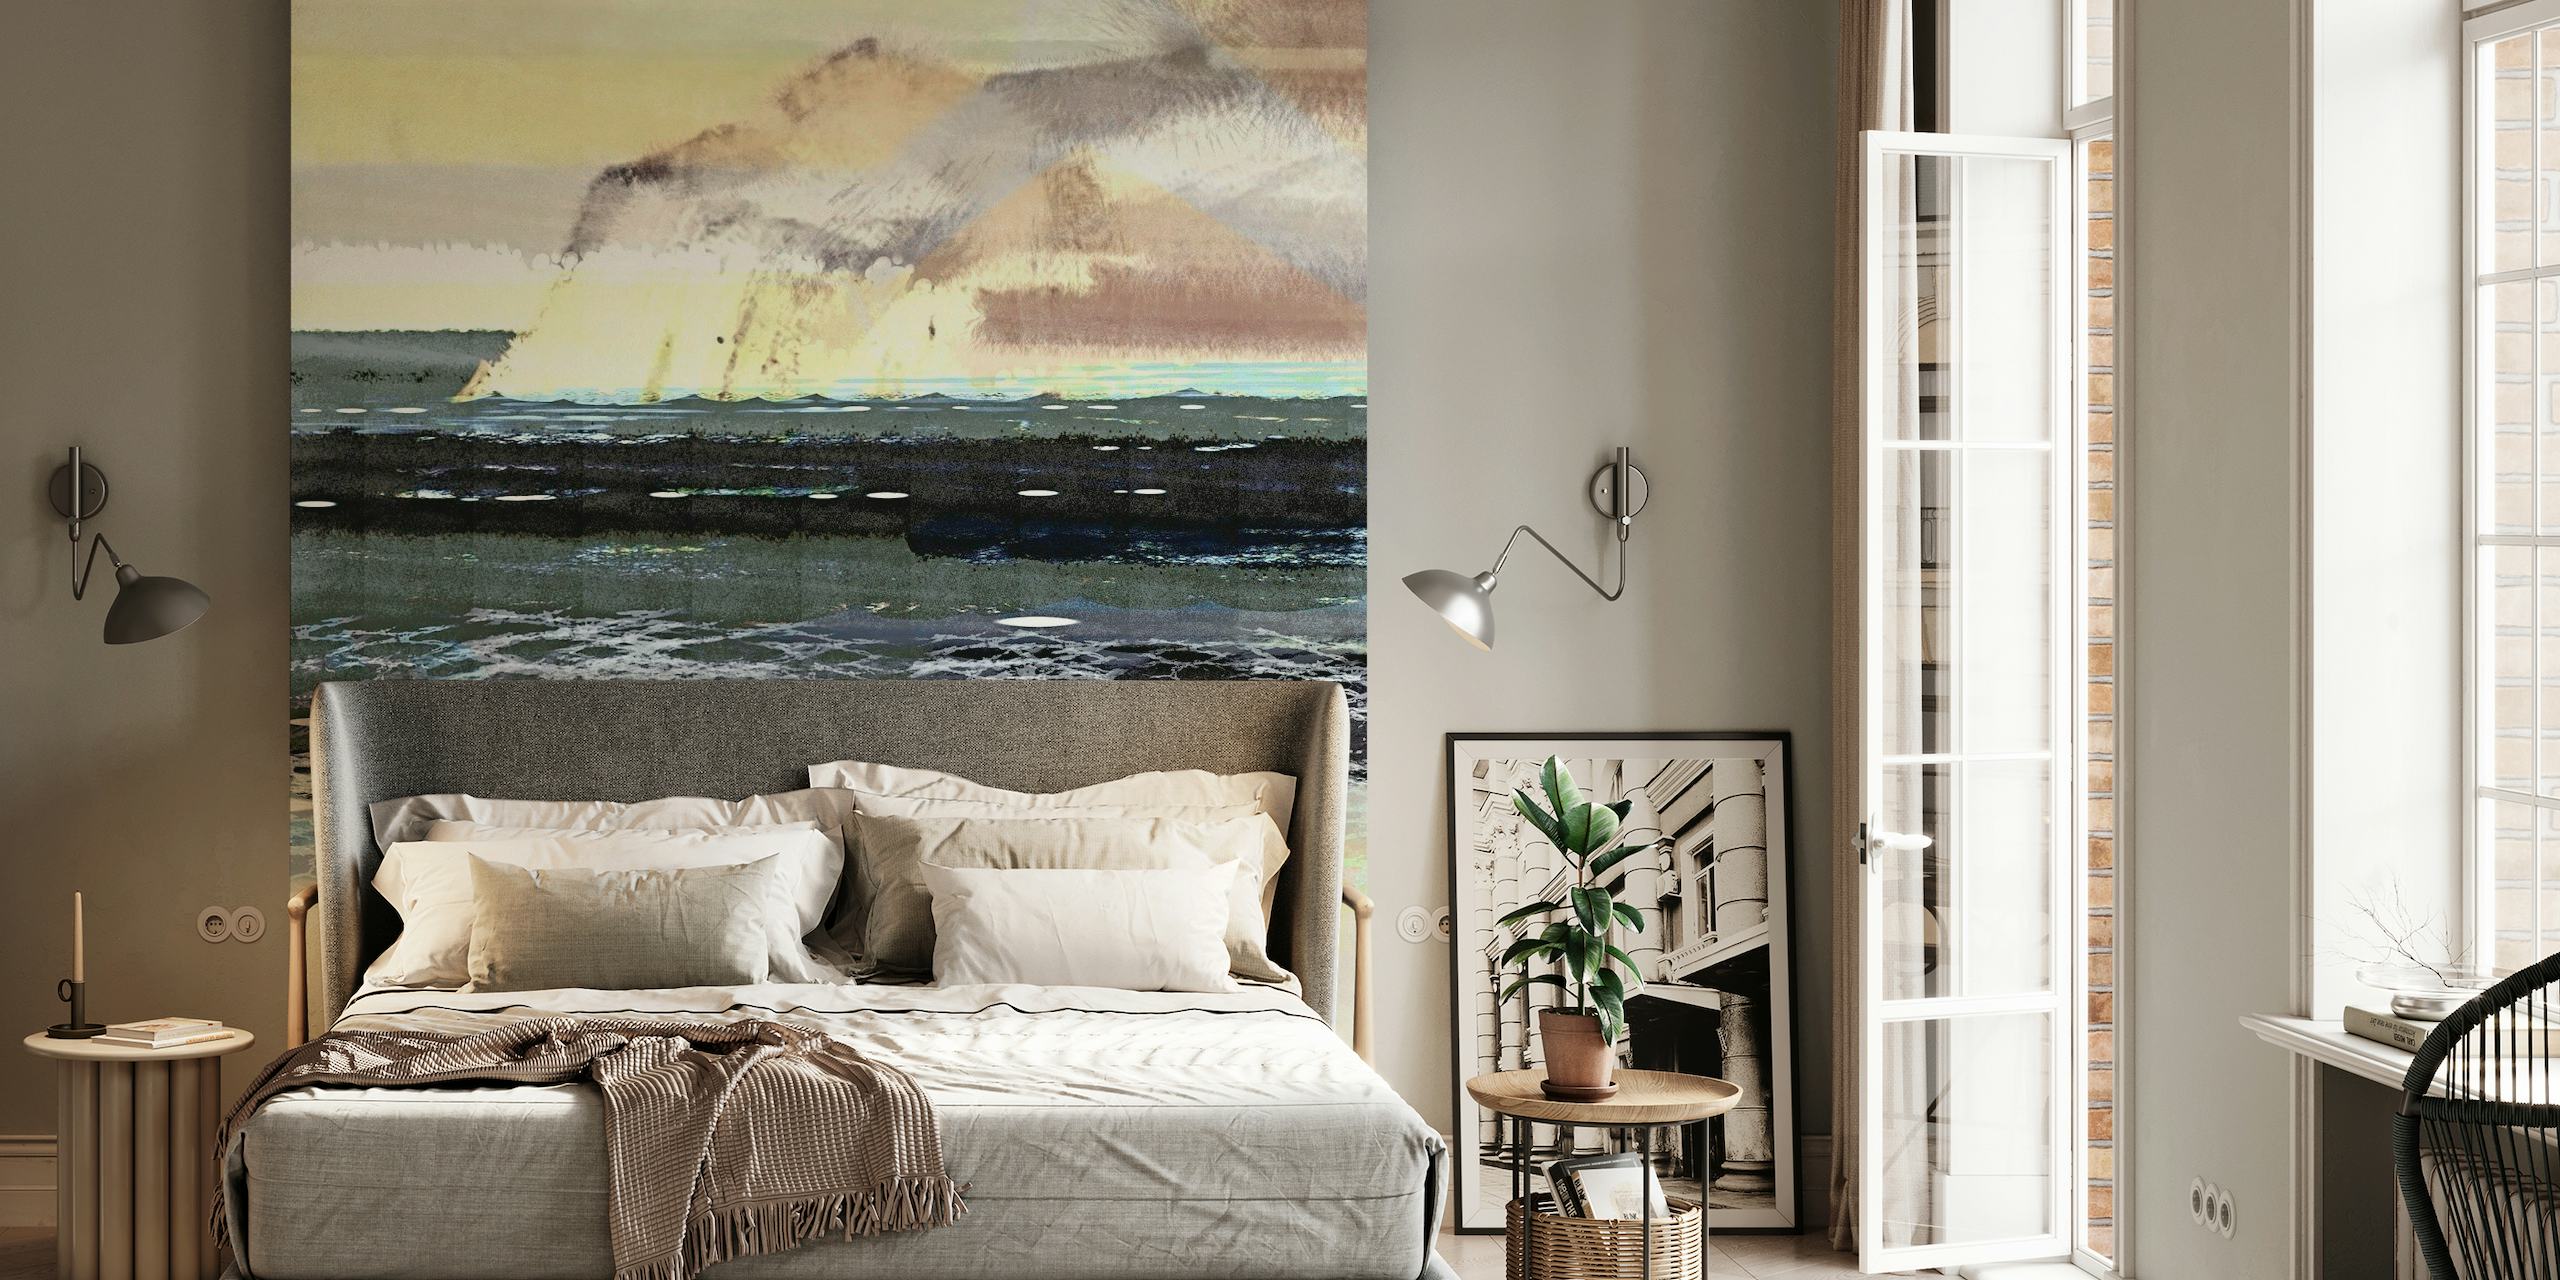 Nordic Ocean Cliffs wall mural depicting serene sea against a backdrop of cliffs with a pastel-colored sky.